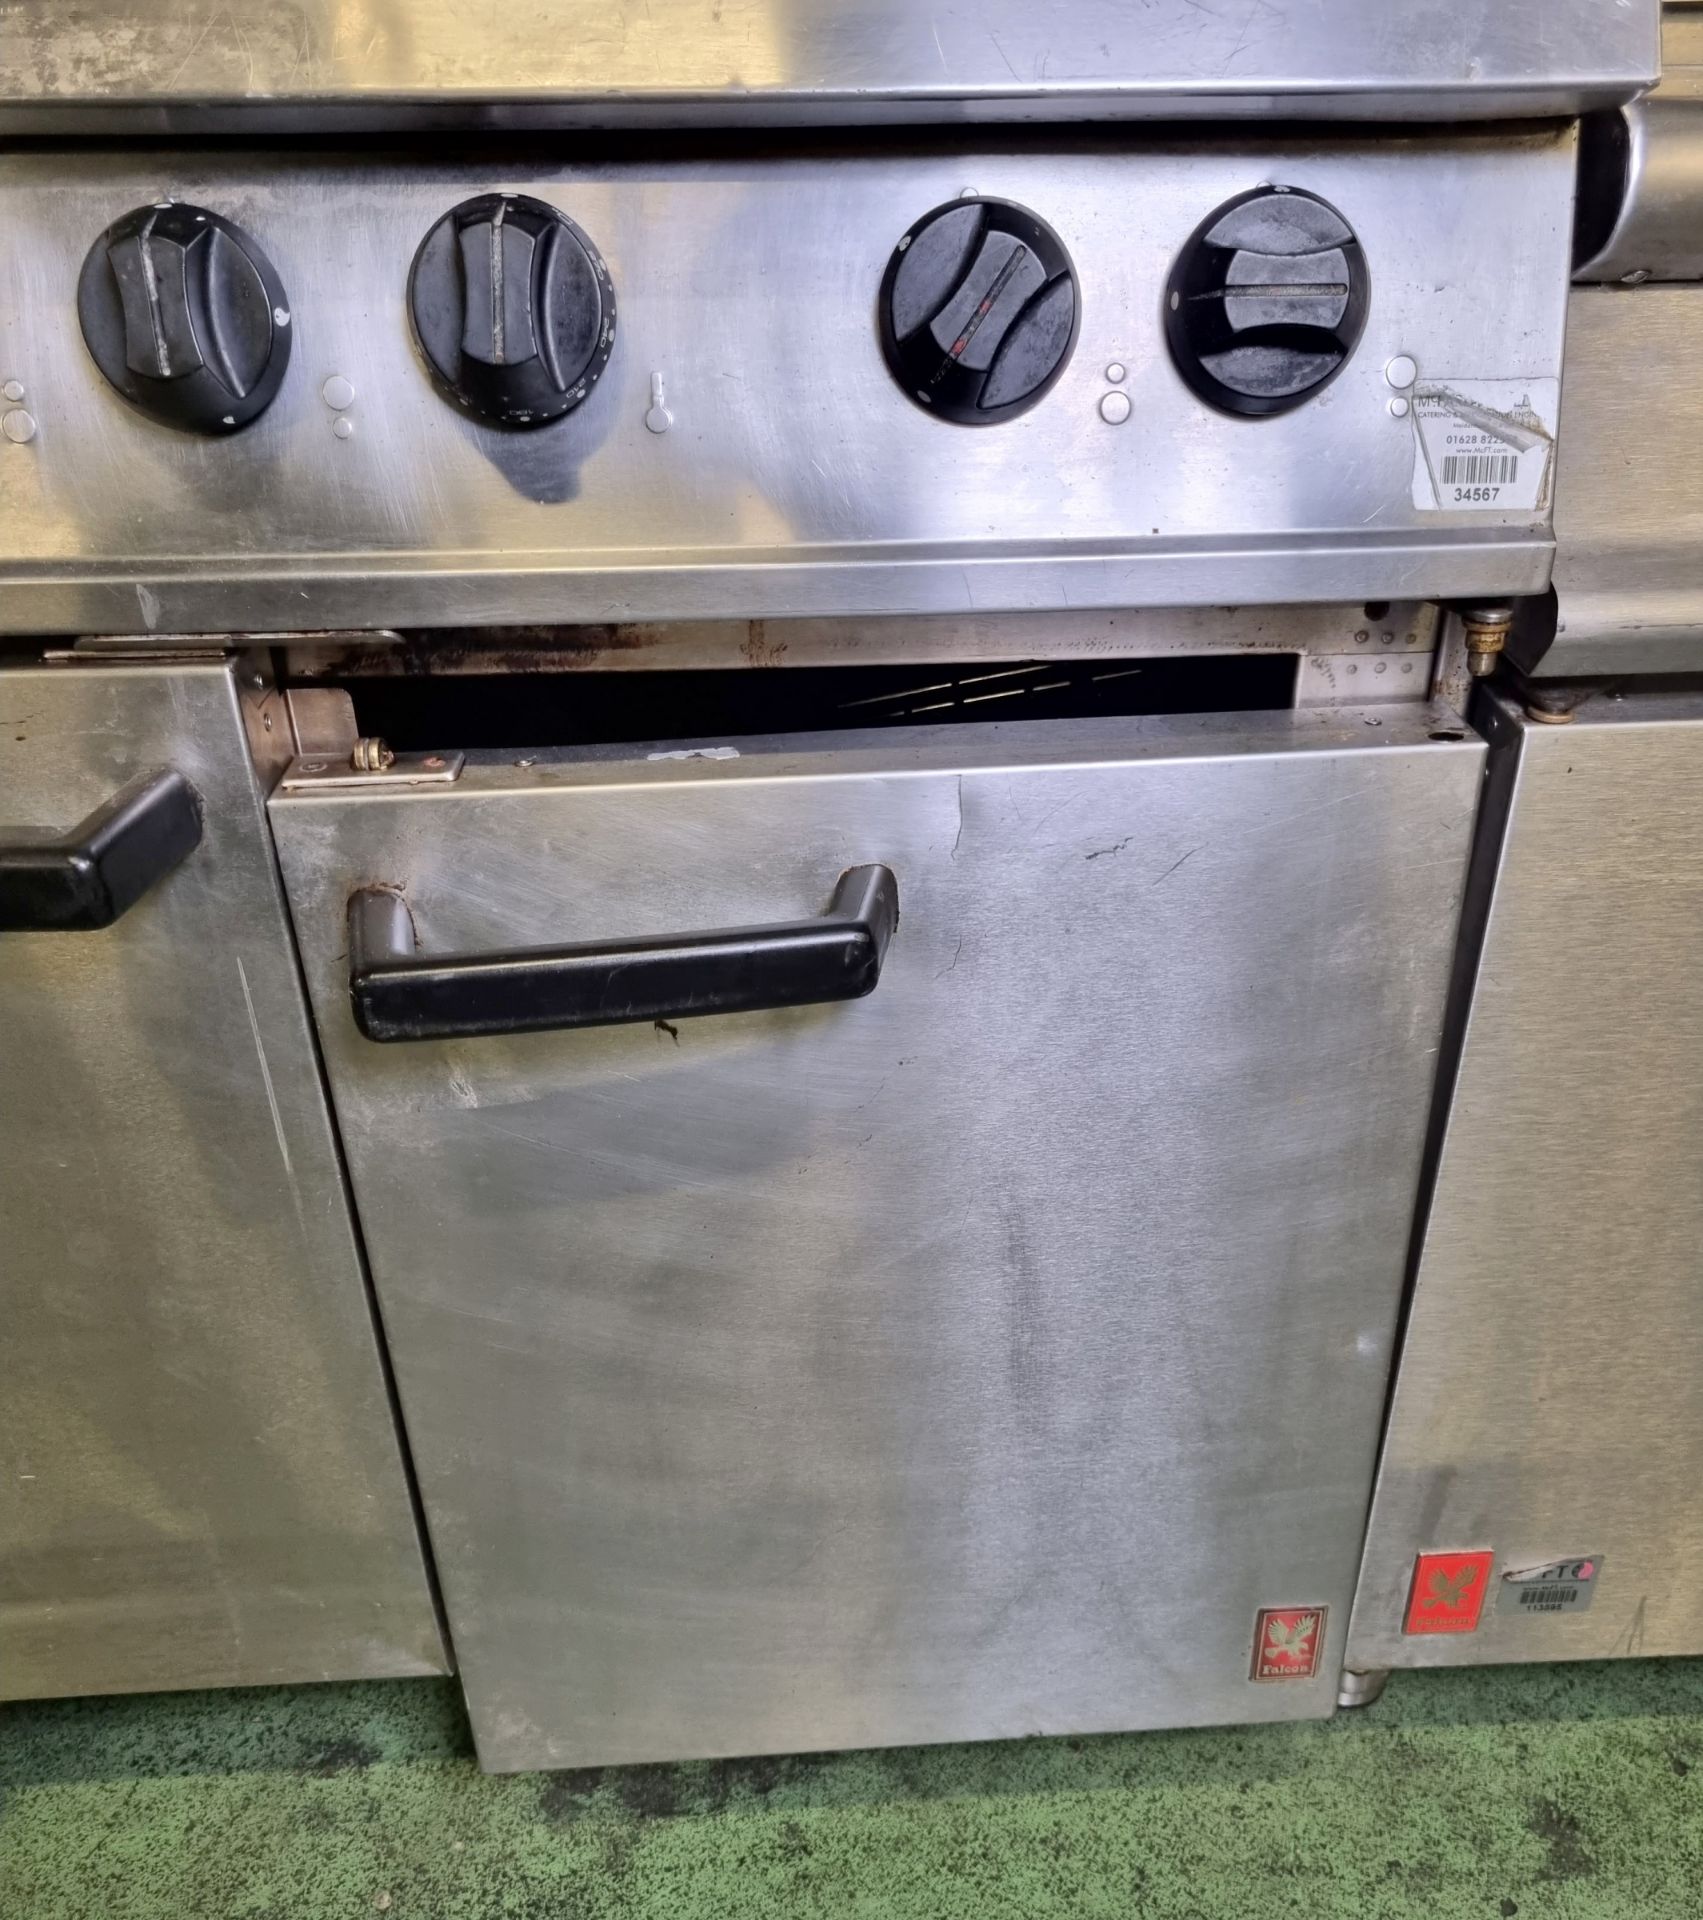 Falcon G21010T stainless steel gas range oven - W 90 x D 80 x H 95 cm, 120kg - Image 4 of 5